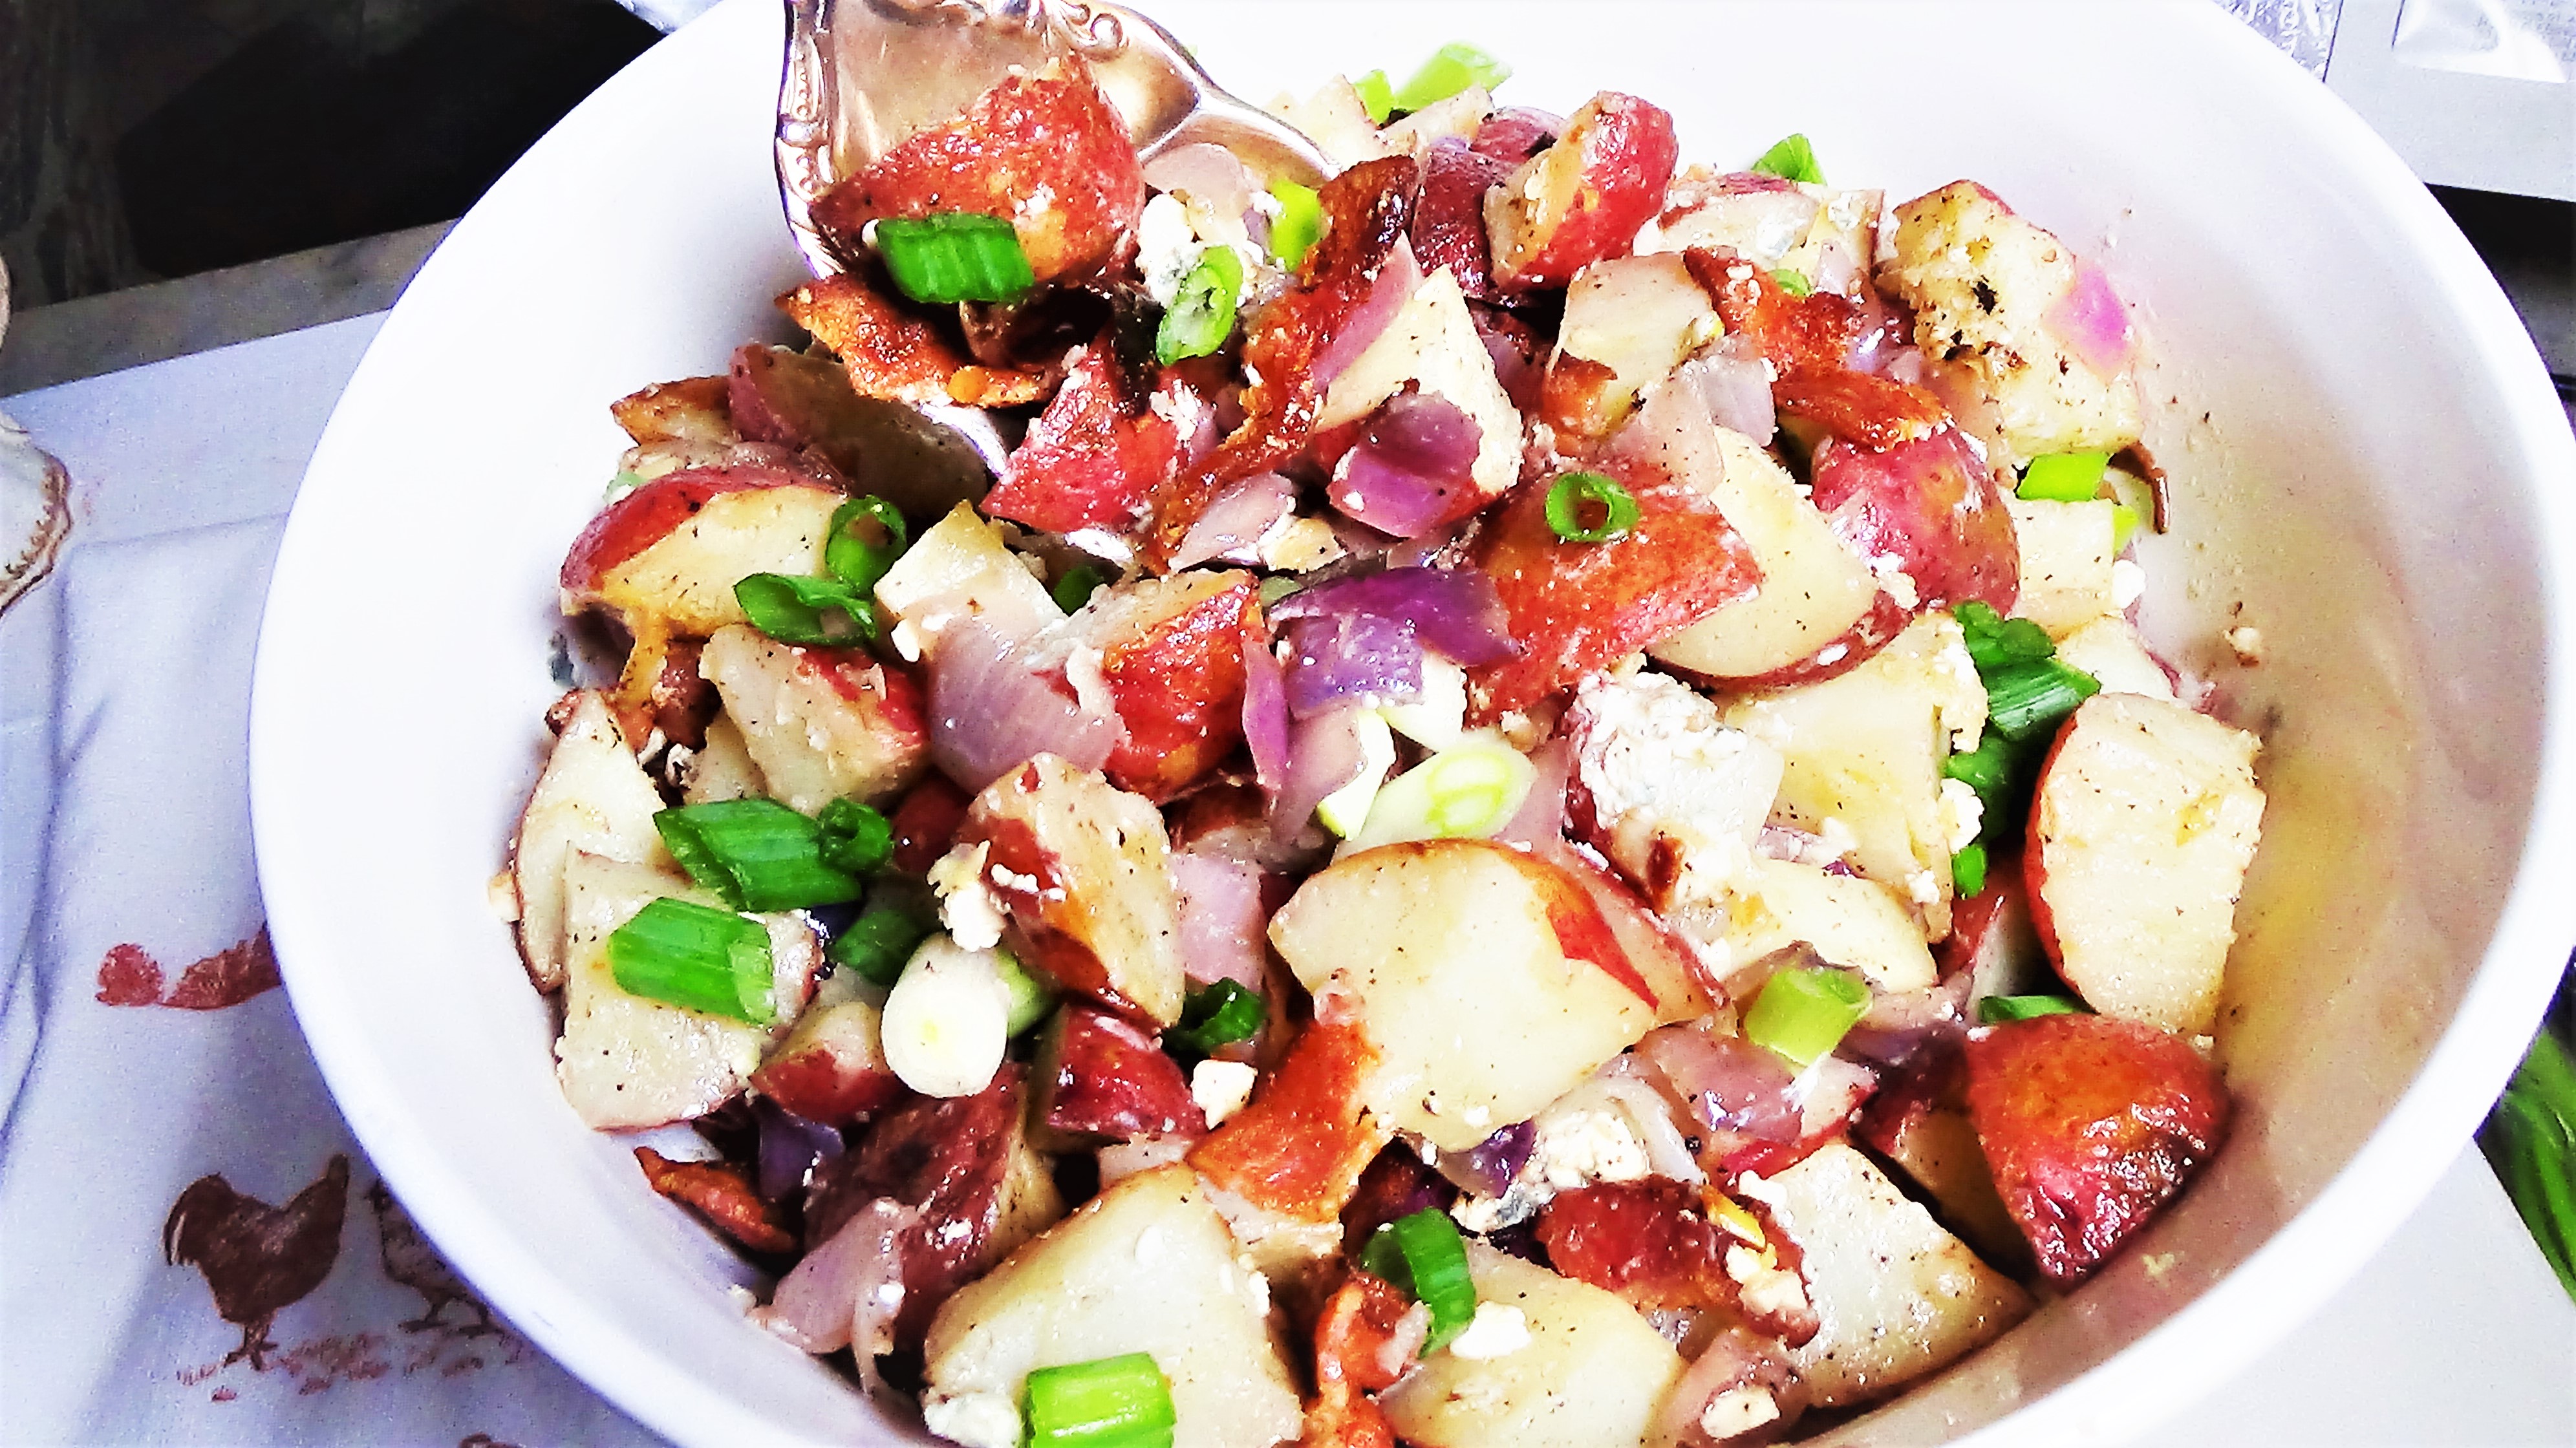 Roasted Red Potato Salad with Bacon and Blue Cheese